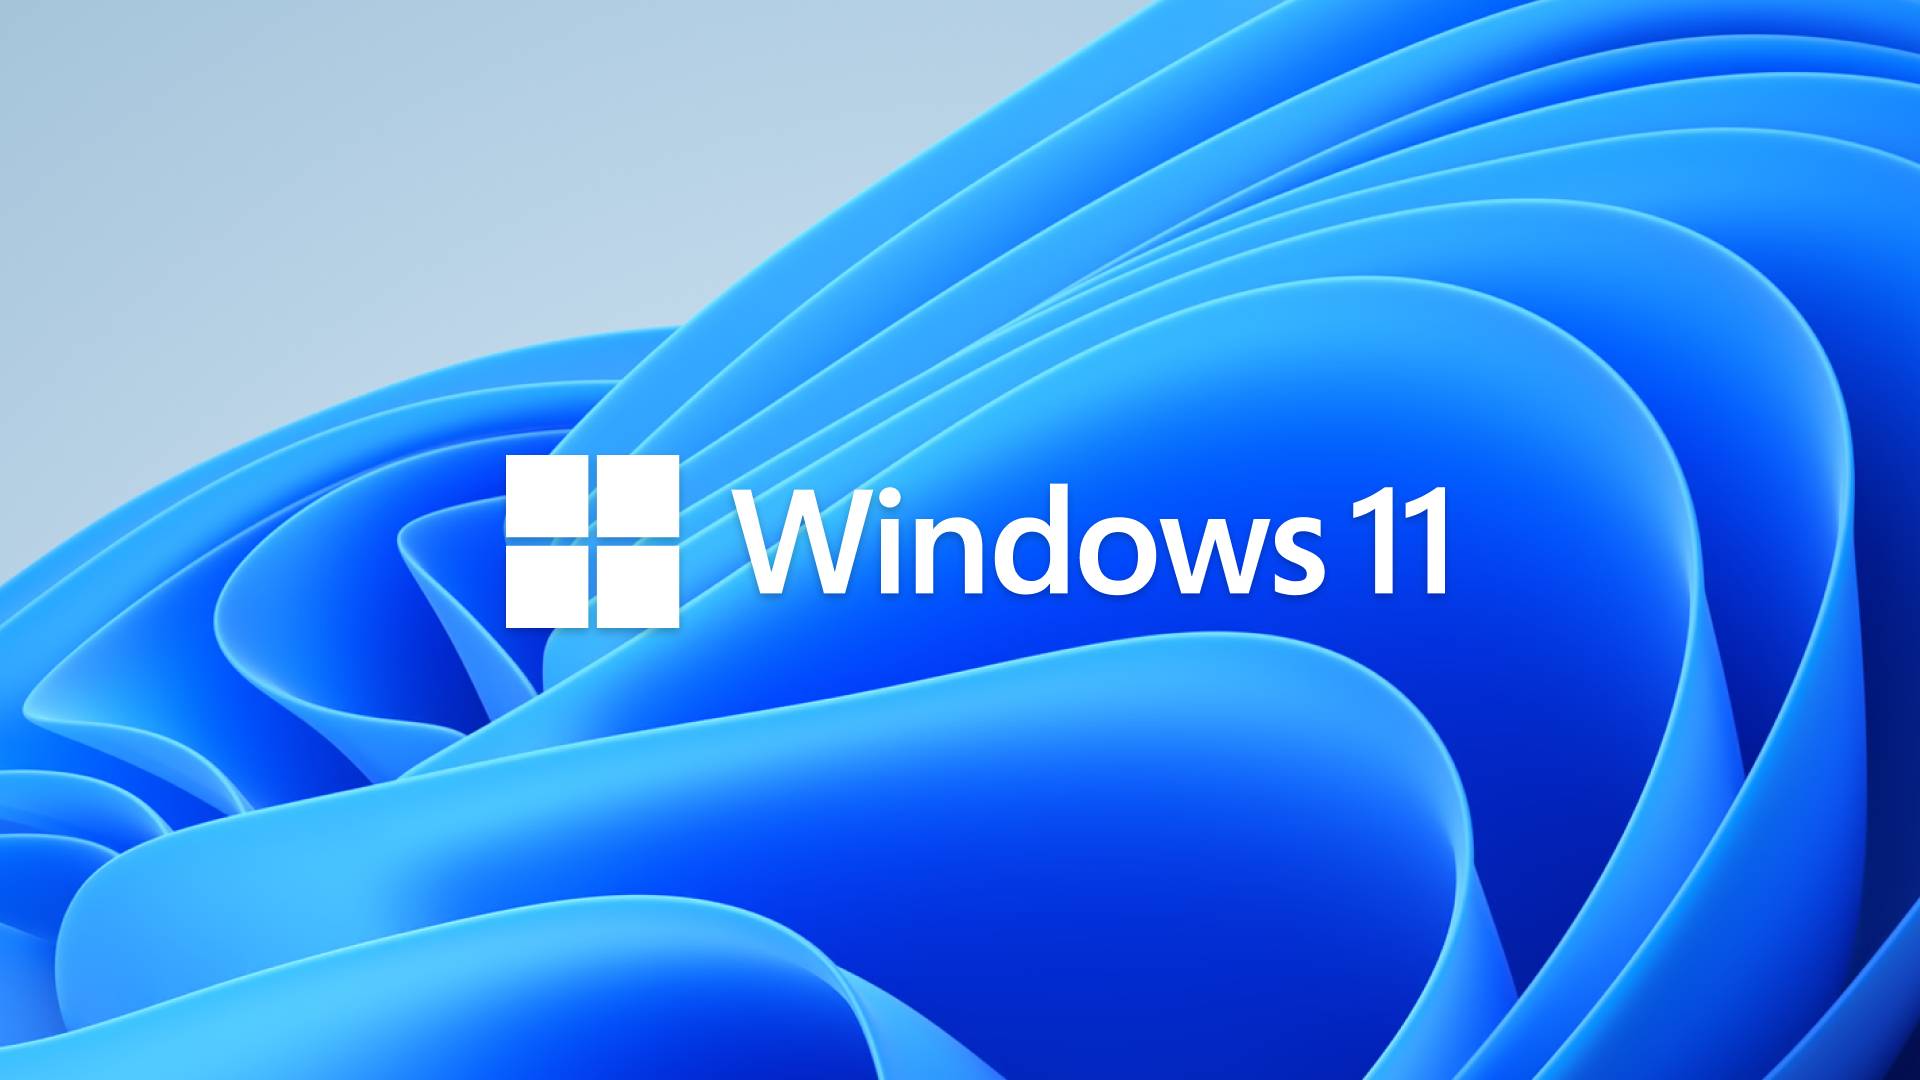 Windows 11 Update Officially Released Microsoft You will HATE THE CHANGES